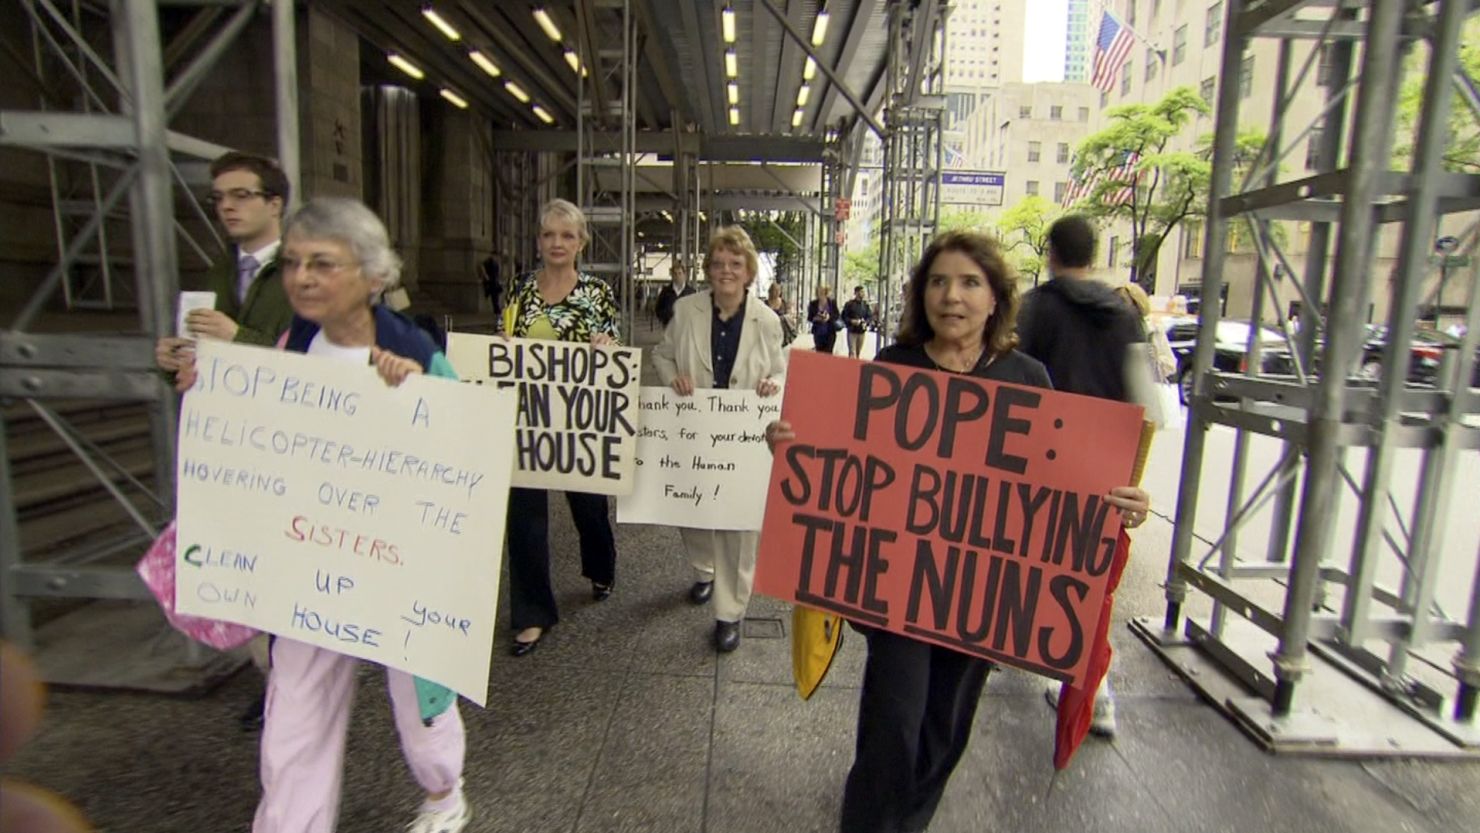 Protesters demonstrate at New York's St. Patrick's Cathedral against the Vatican's response to U.S. nuns' activism.